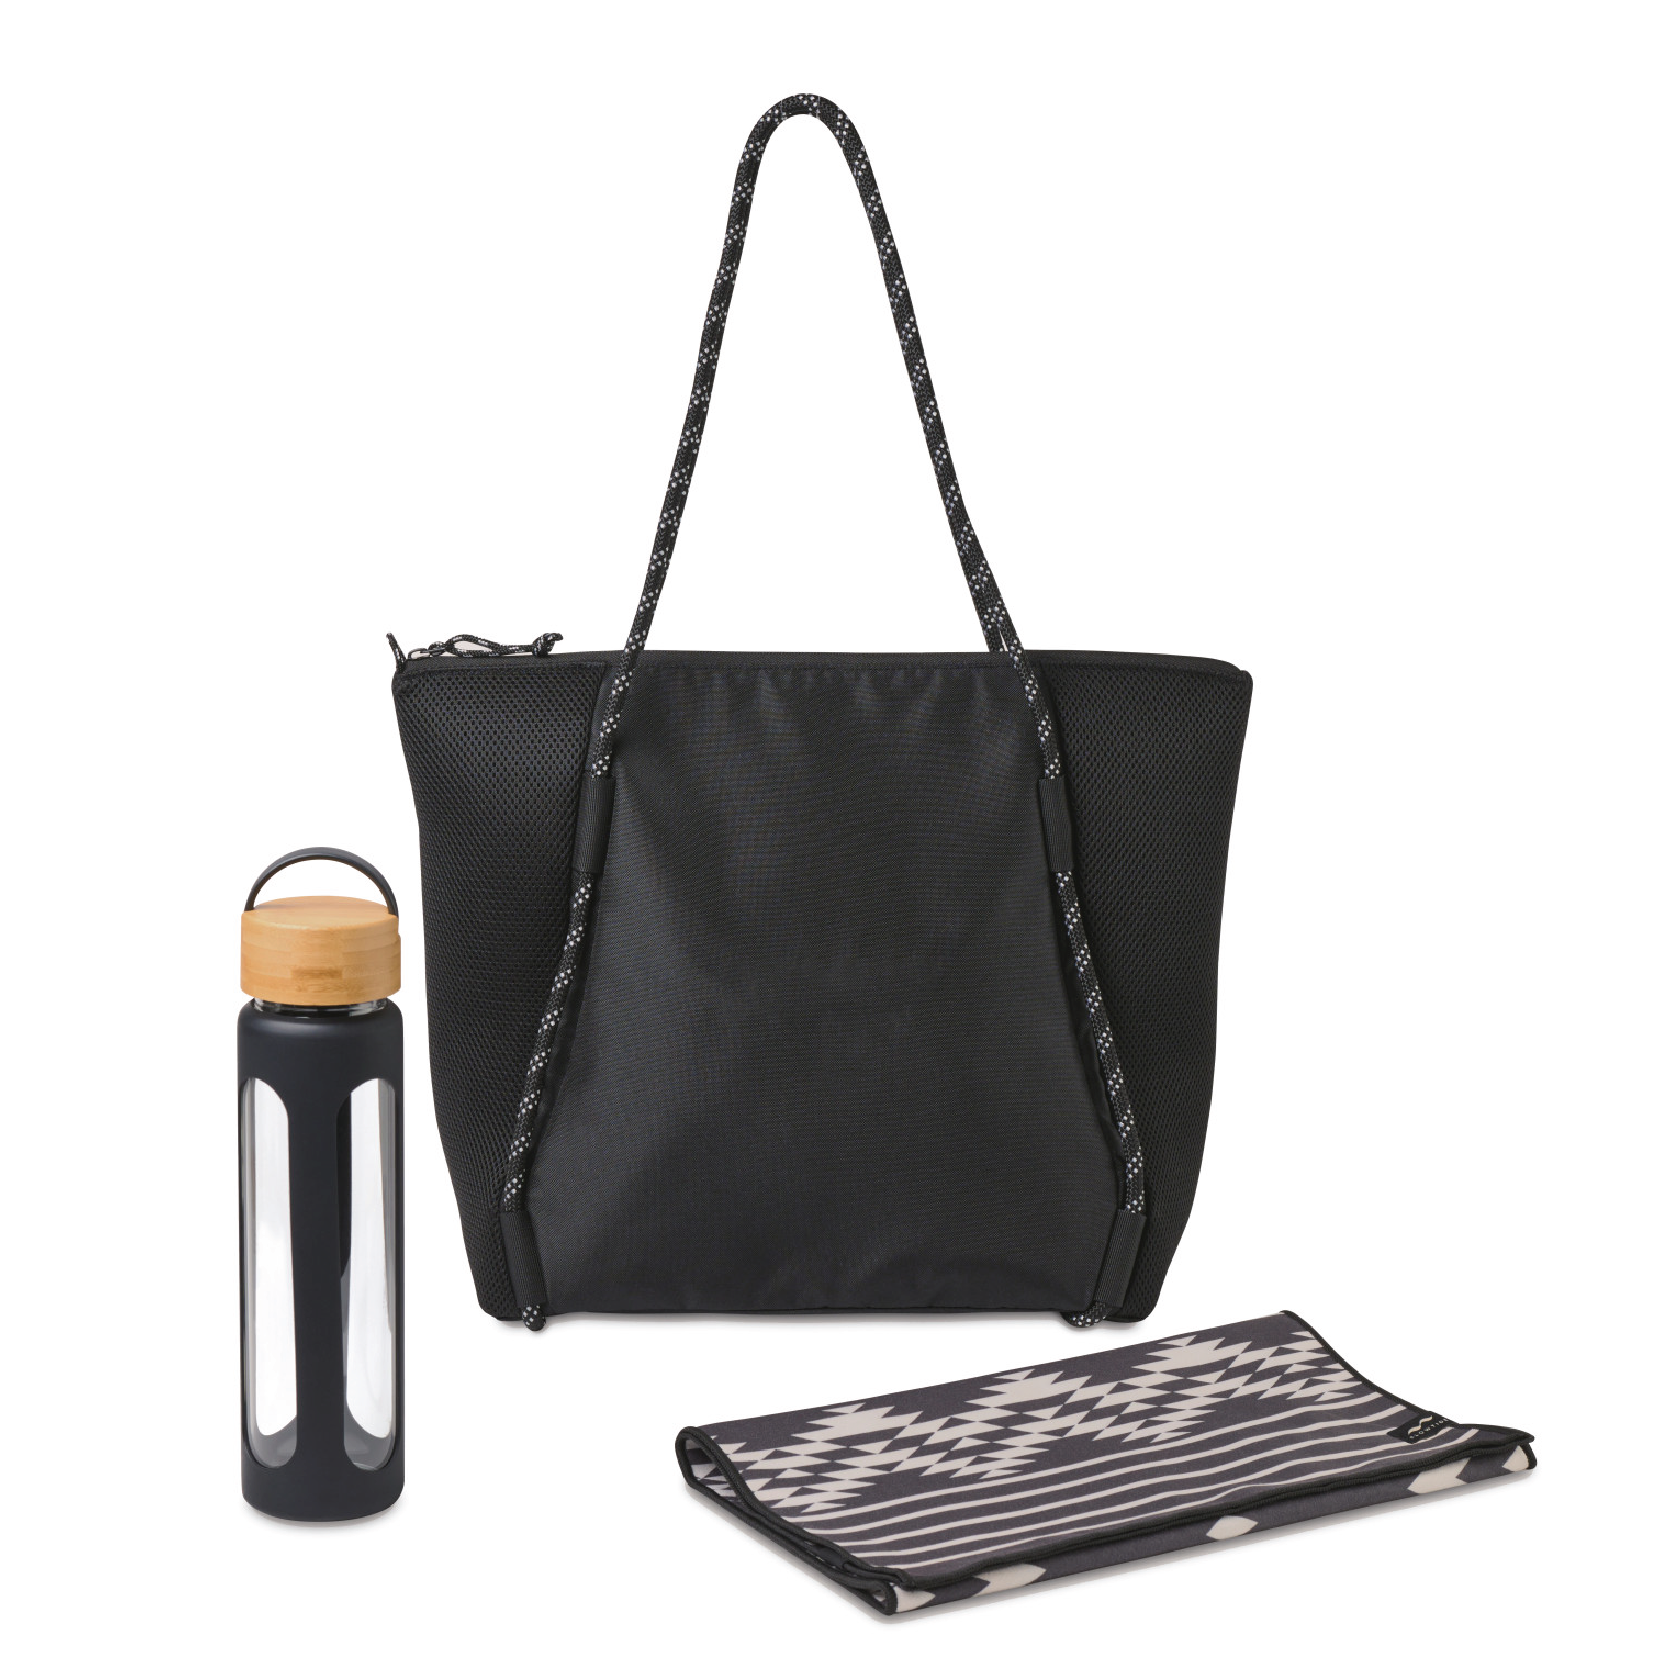 Image of black Slowtide fitness towel, glass water bottle and black tote bag.